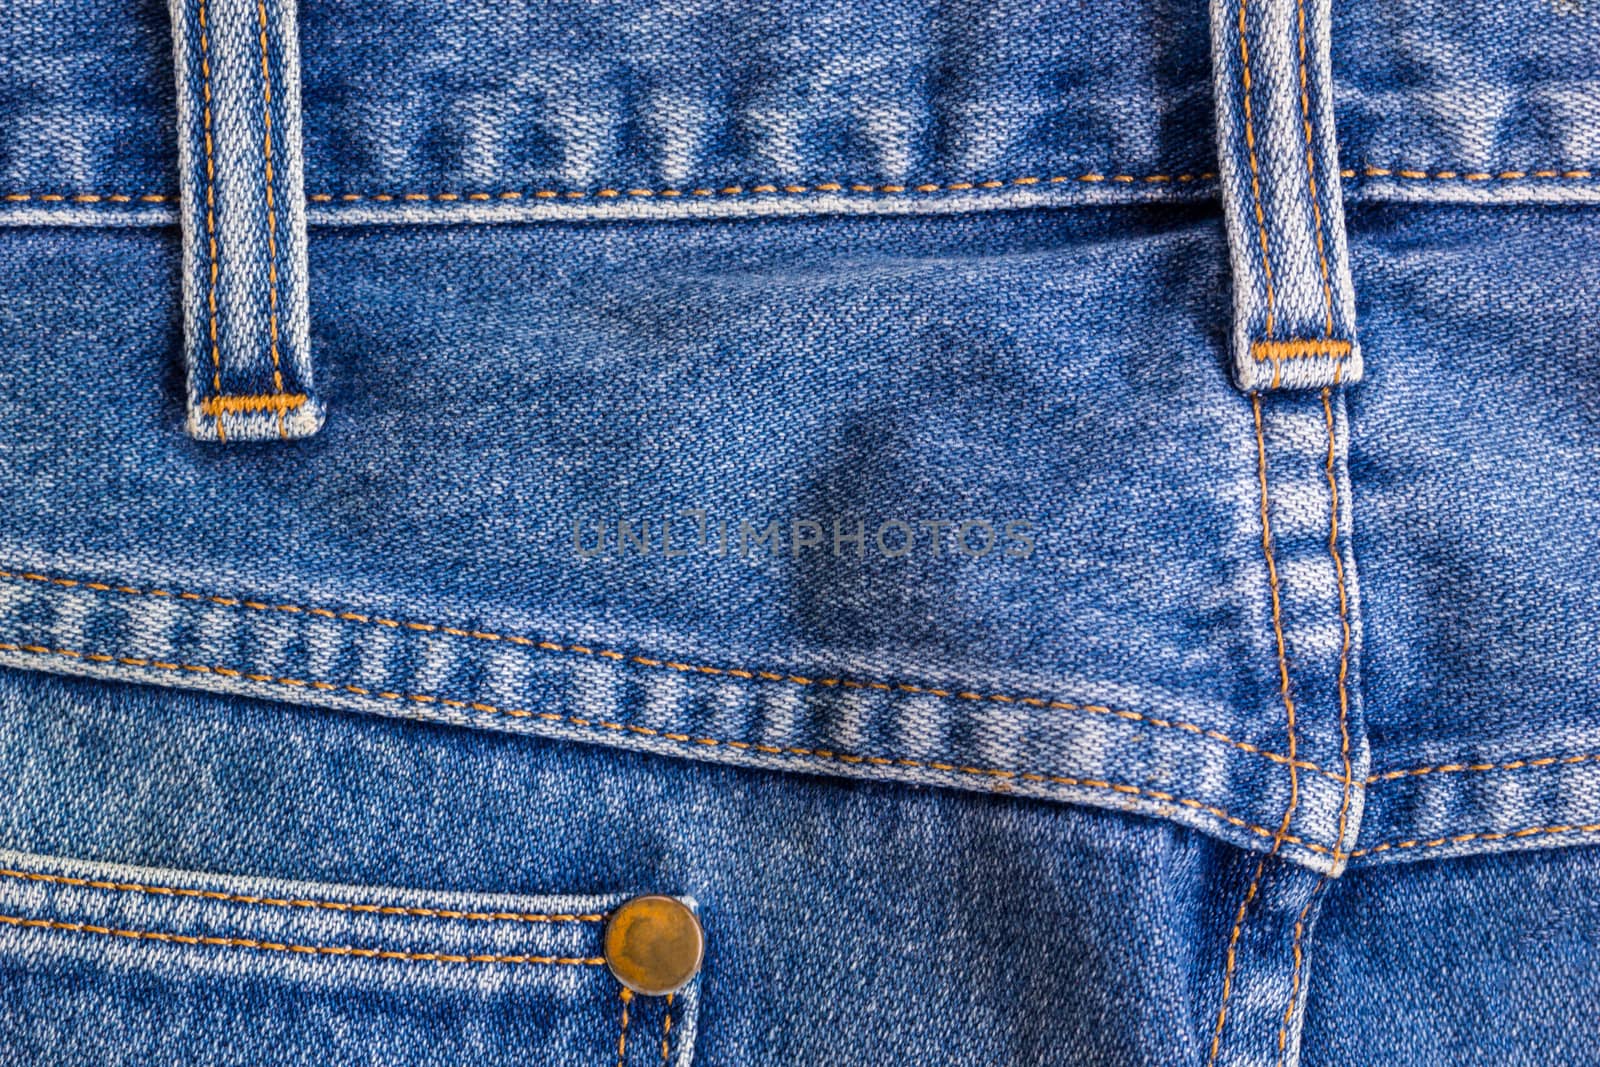 blue jeans texture and background, close-up denim jeans